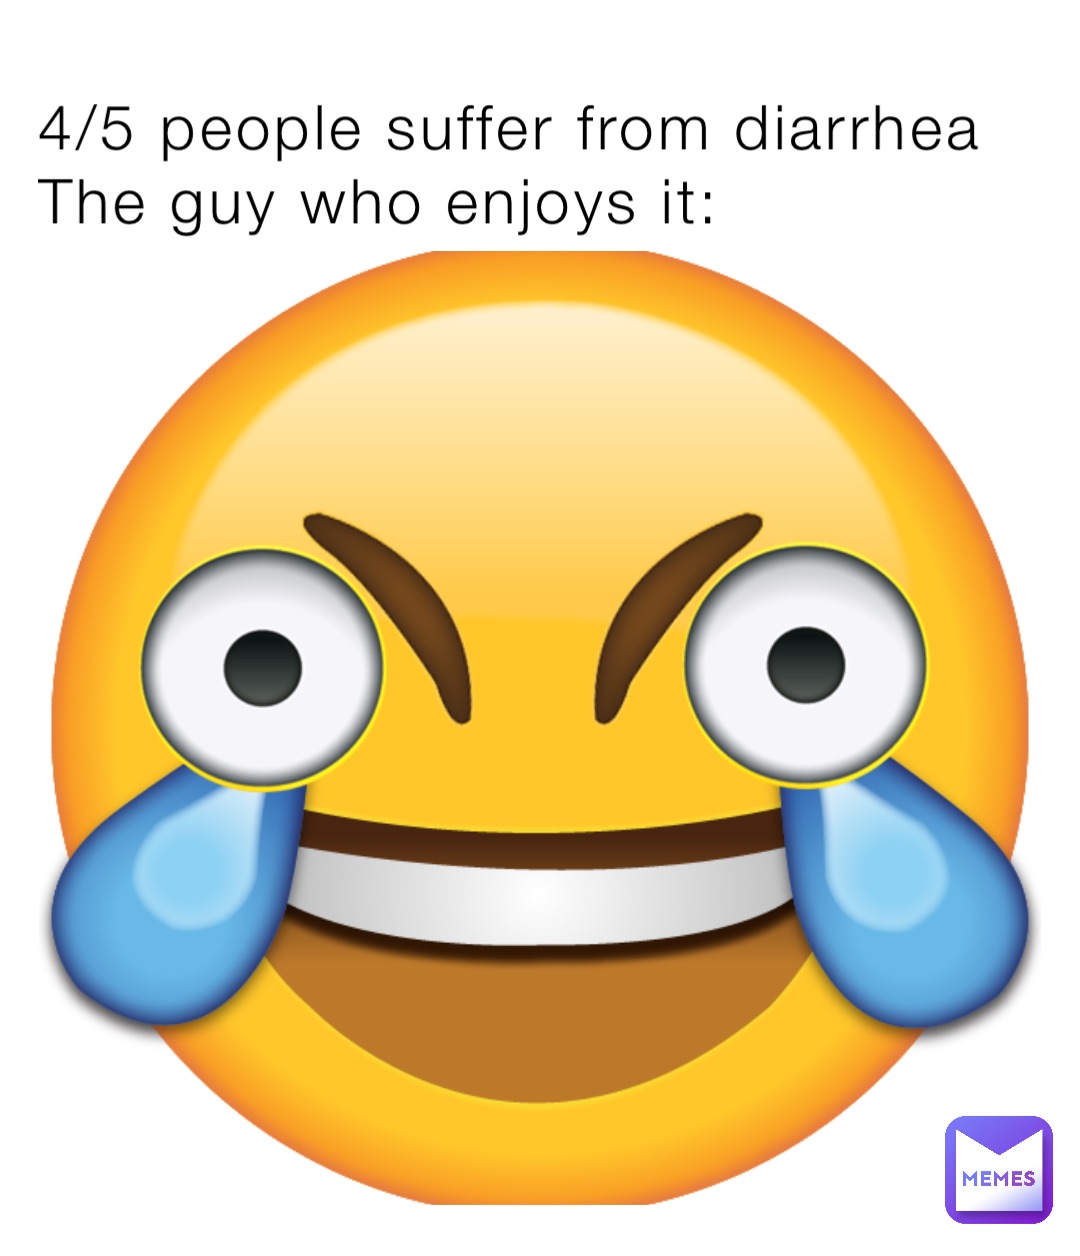 4/5 people suffer from diarrhea
The guy who enjoys it: